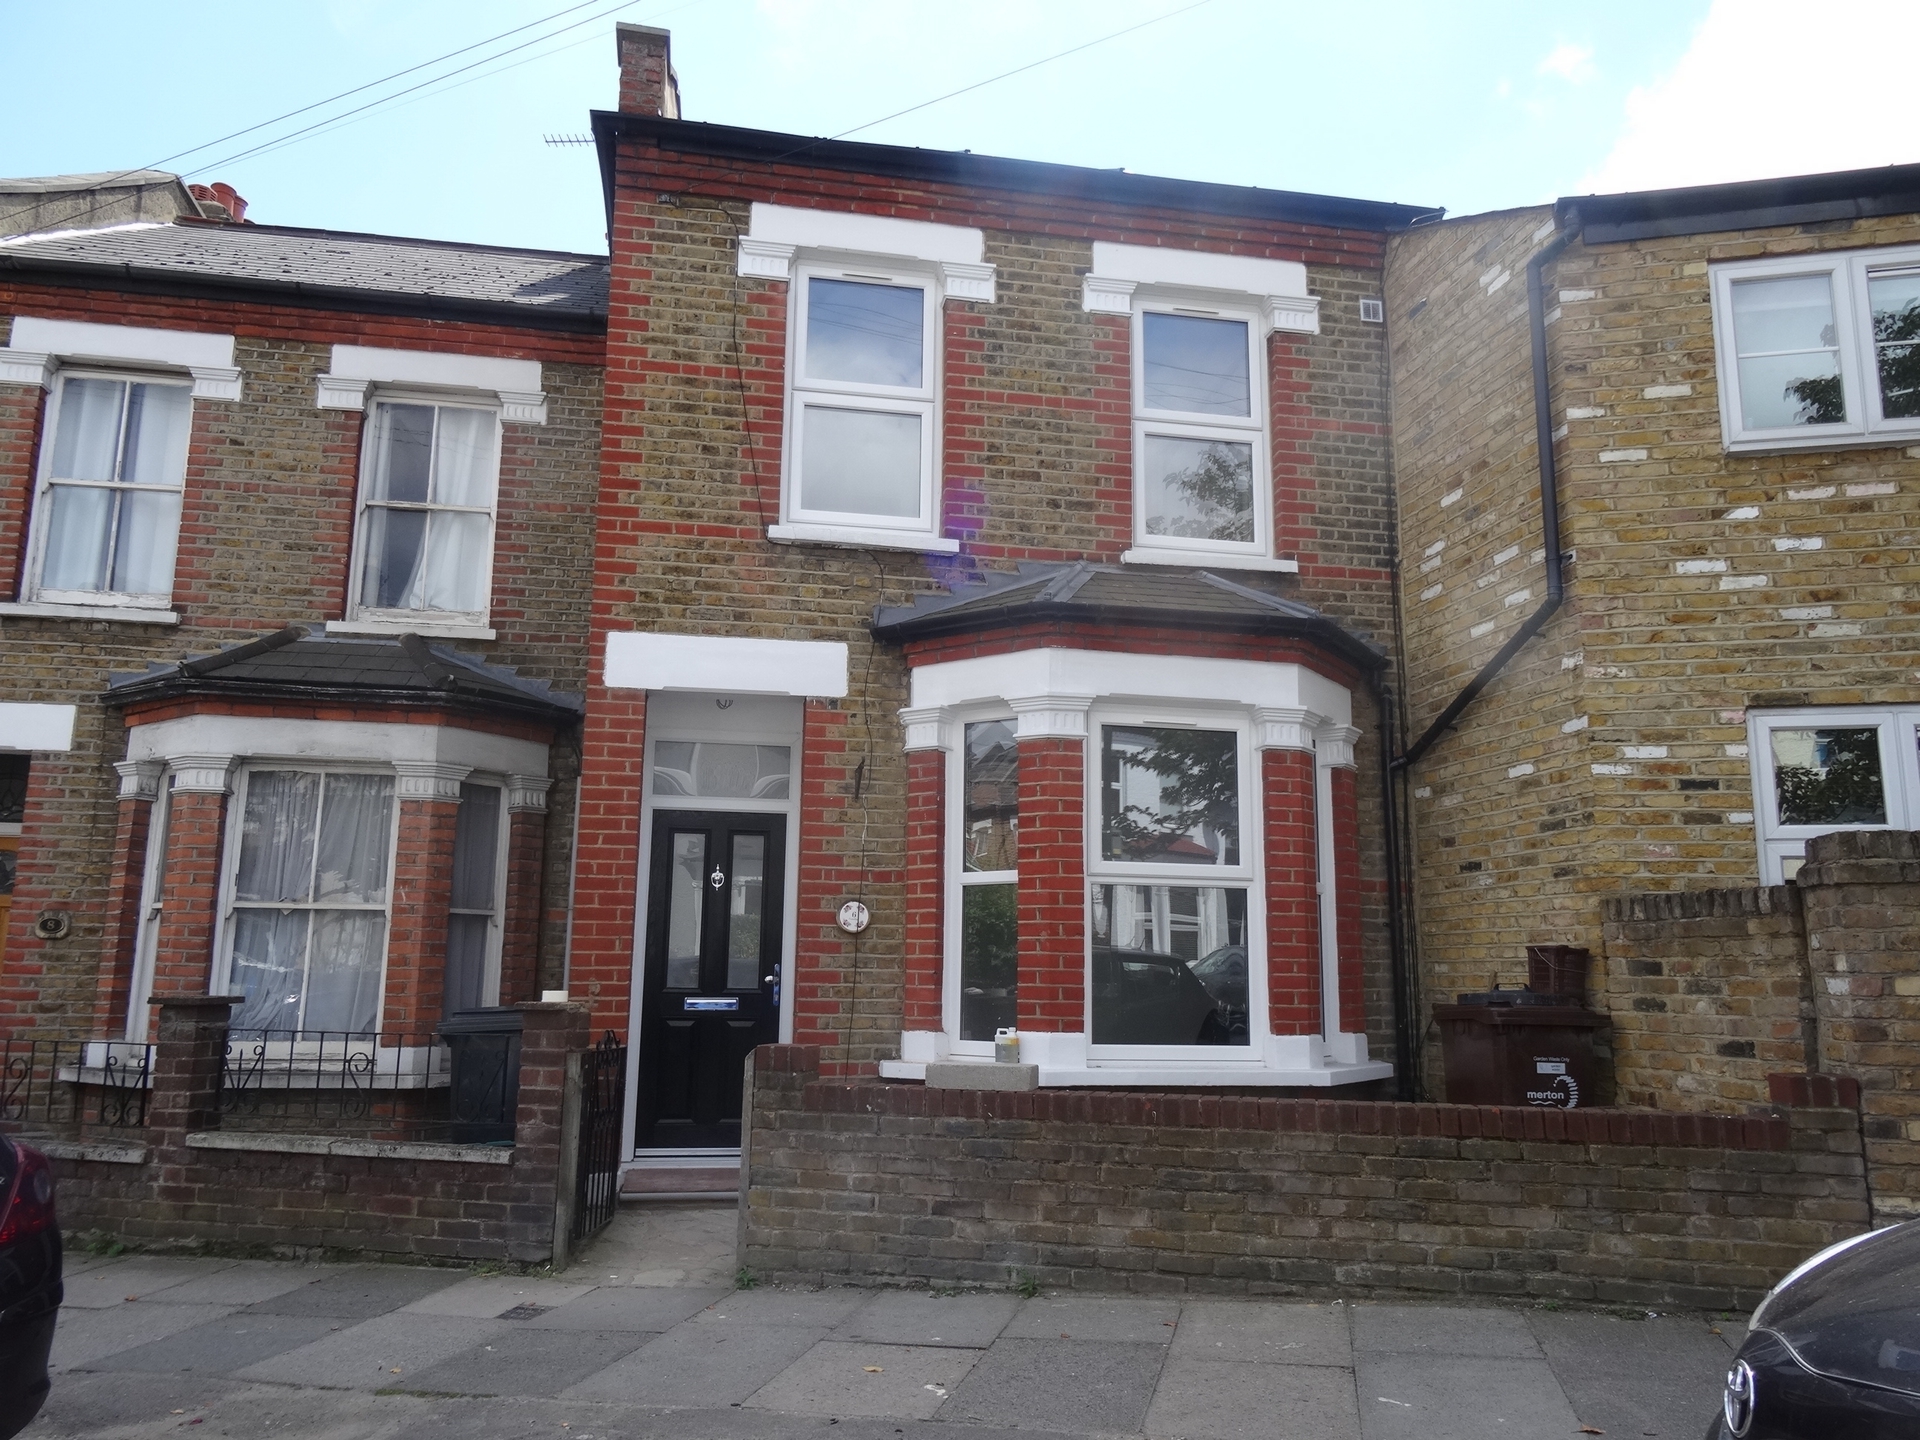 3 Bedroom Conversion to rent in Wimbledon, London, SW19